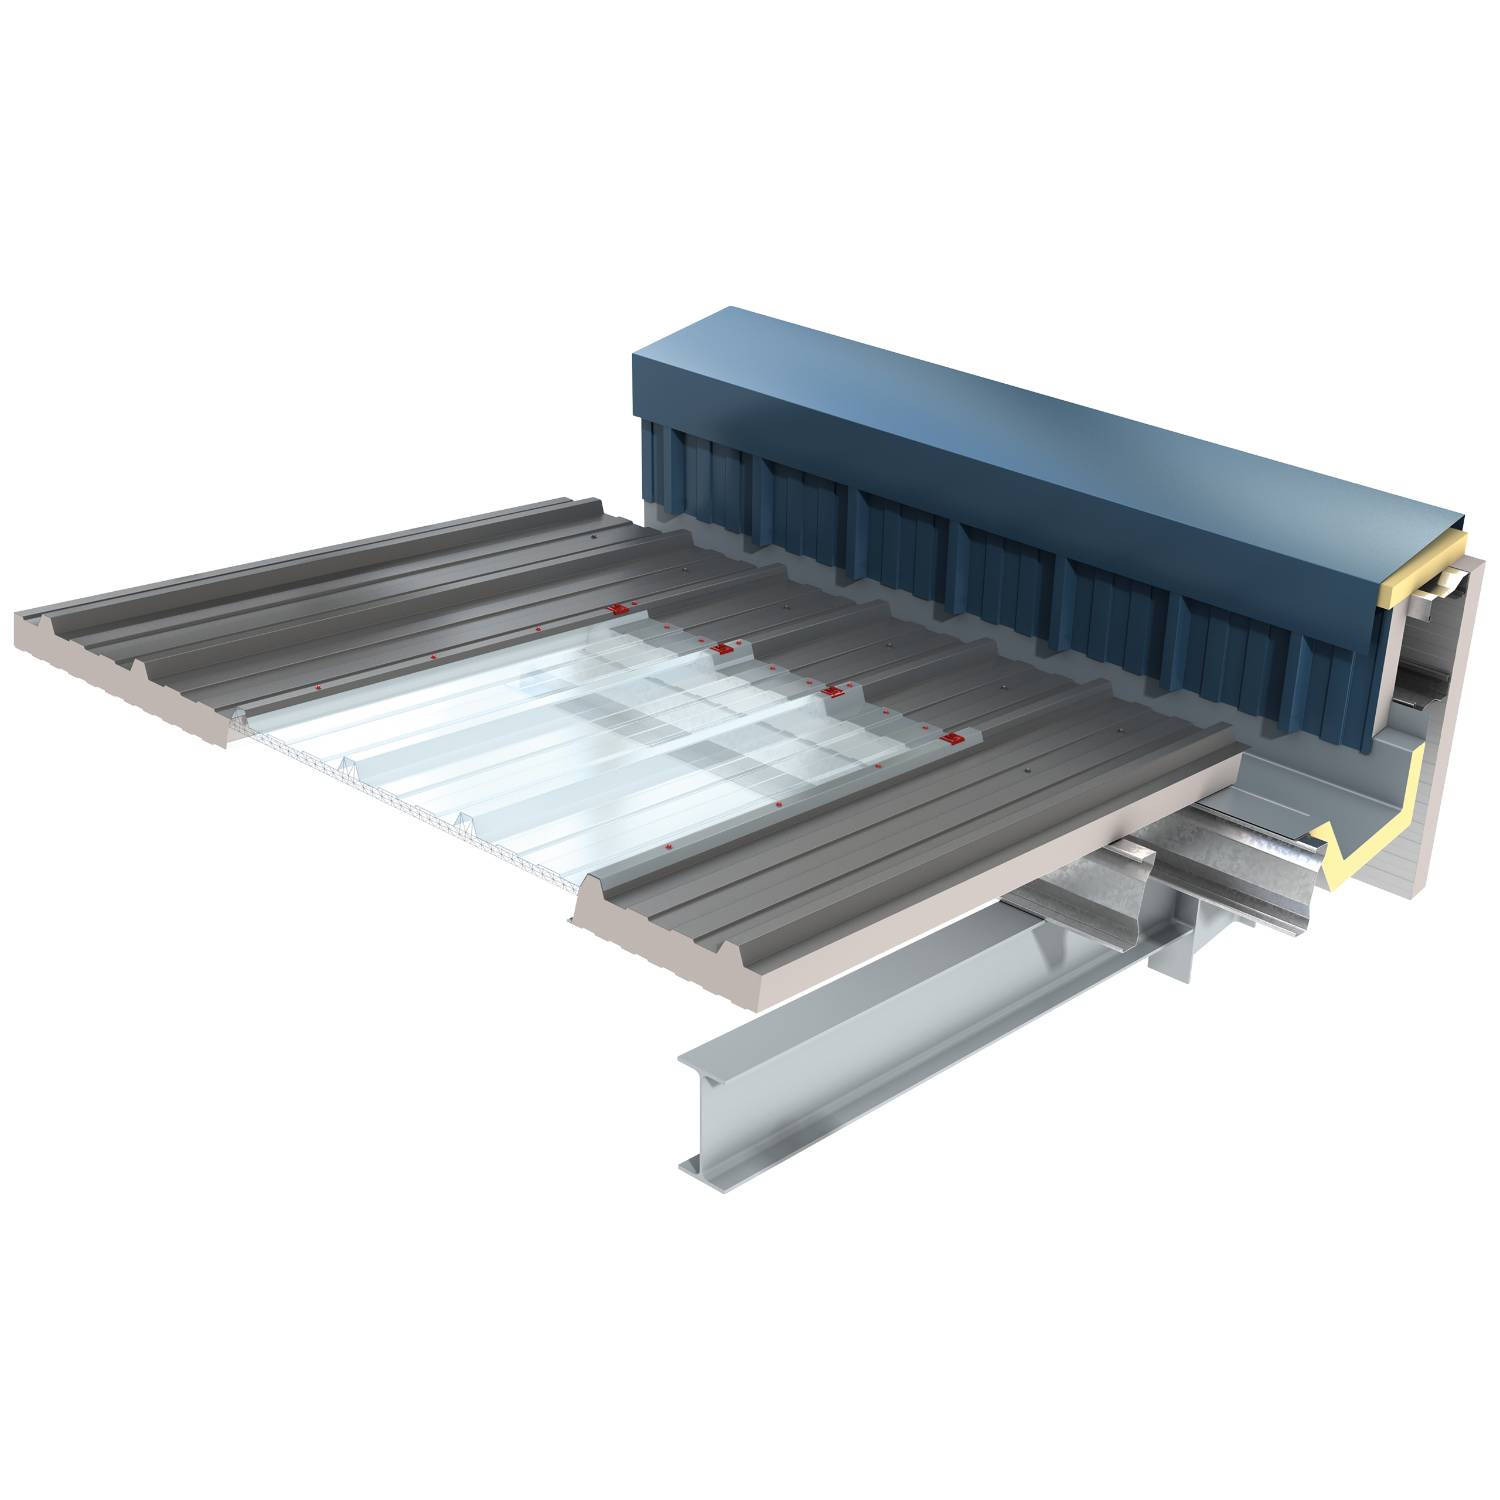 Day-Lite Trapezoidal FAS Rooflight (DLTR FAS)